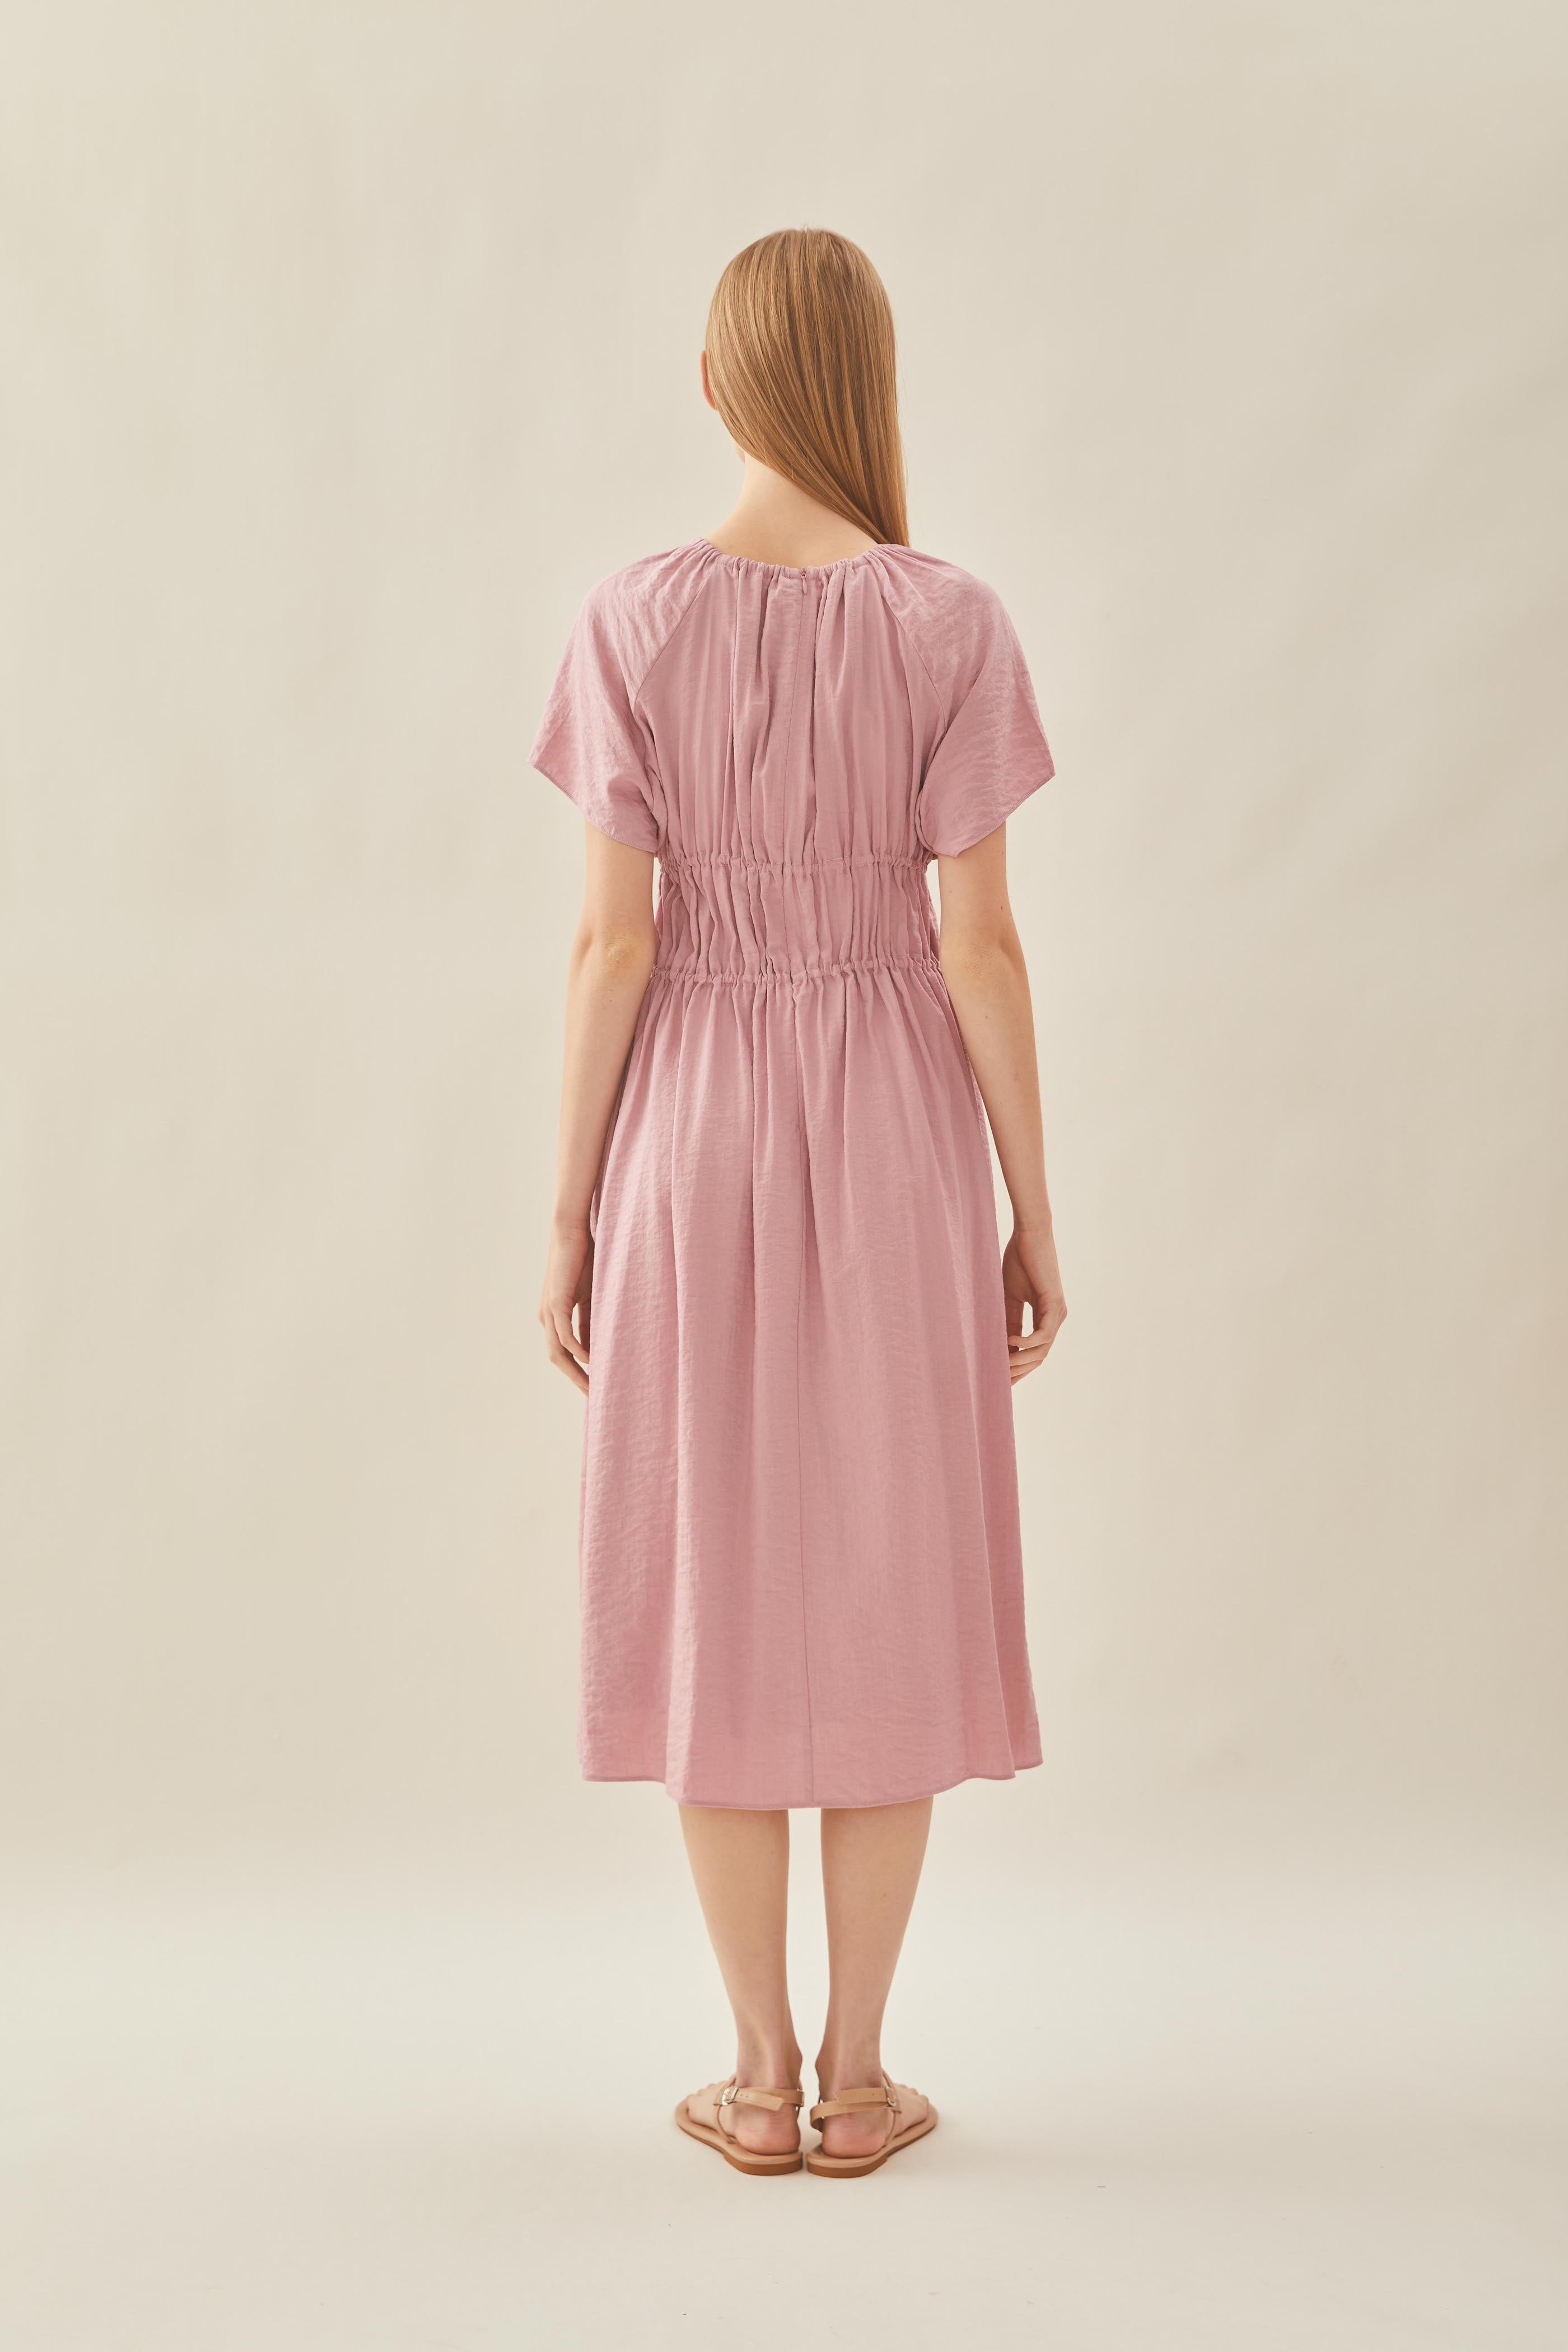 Ruched Waist Dress in Tea Rose